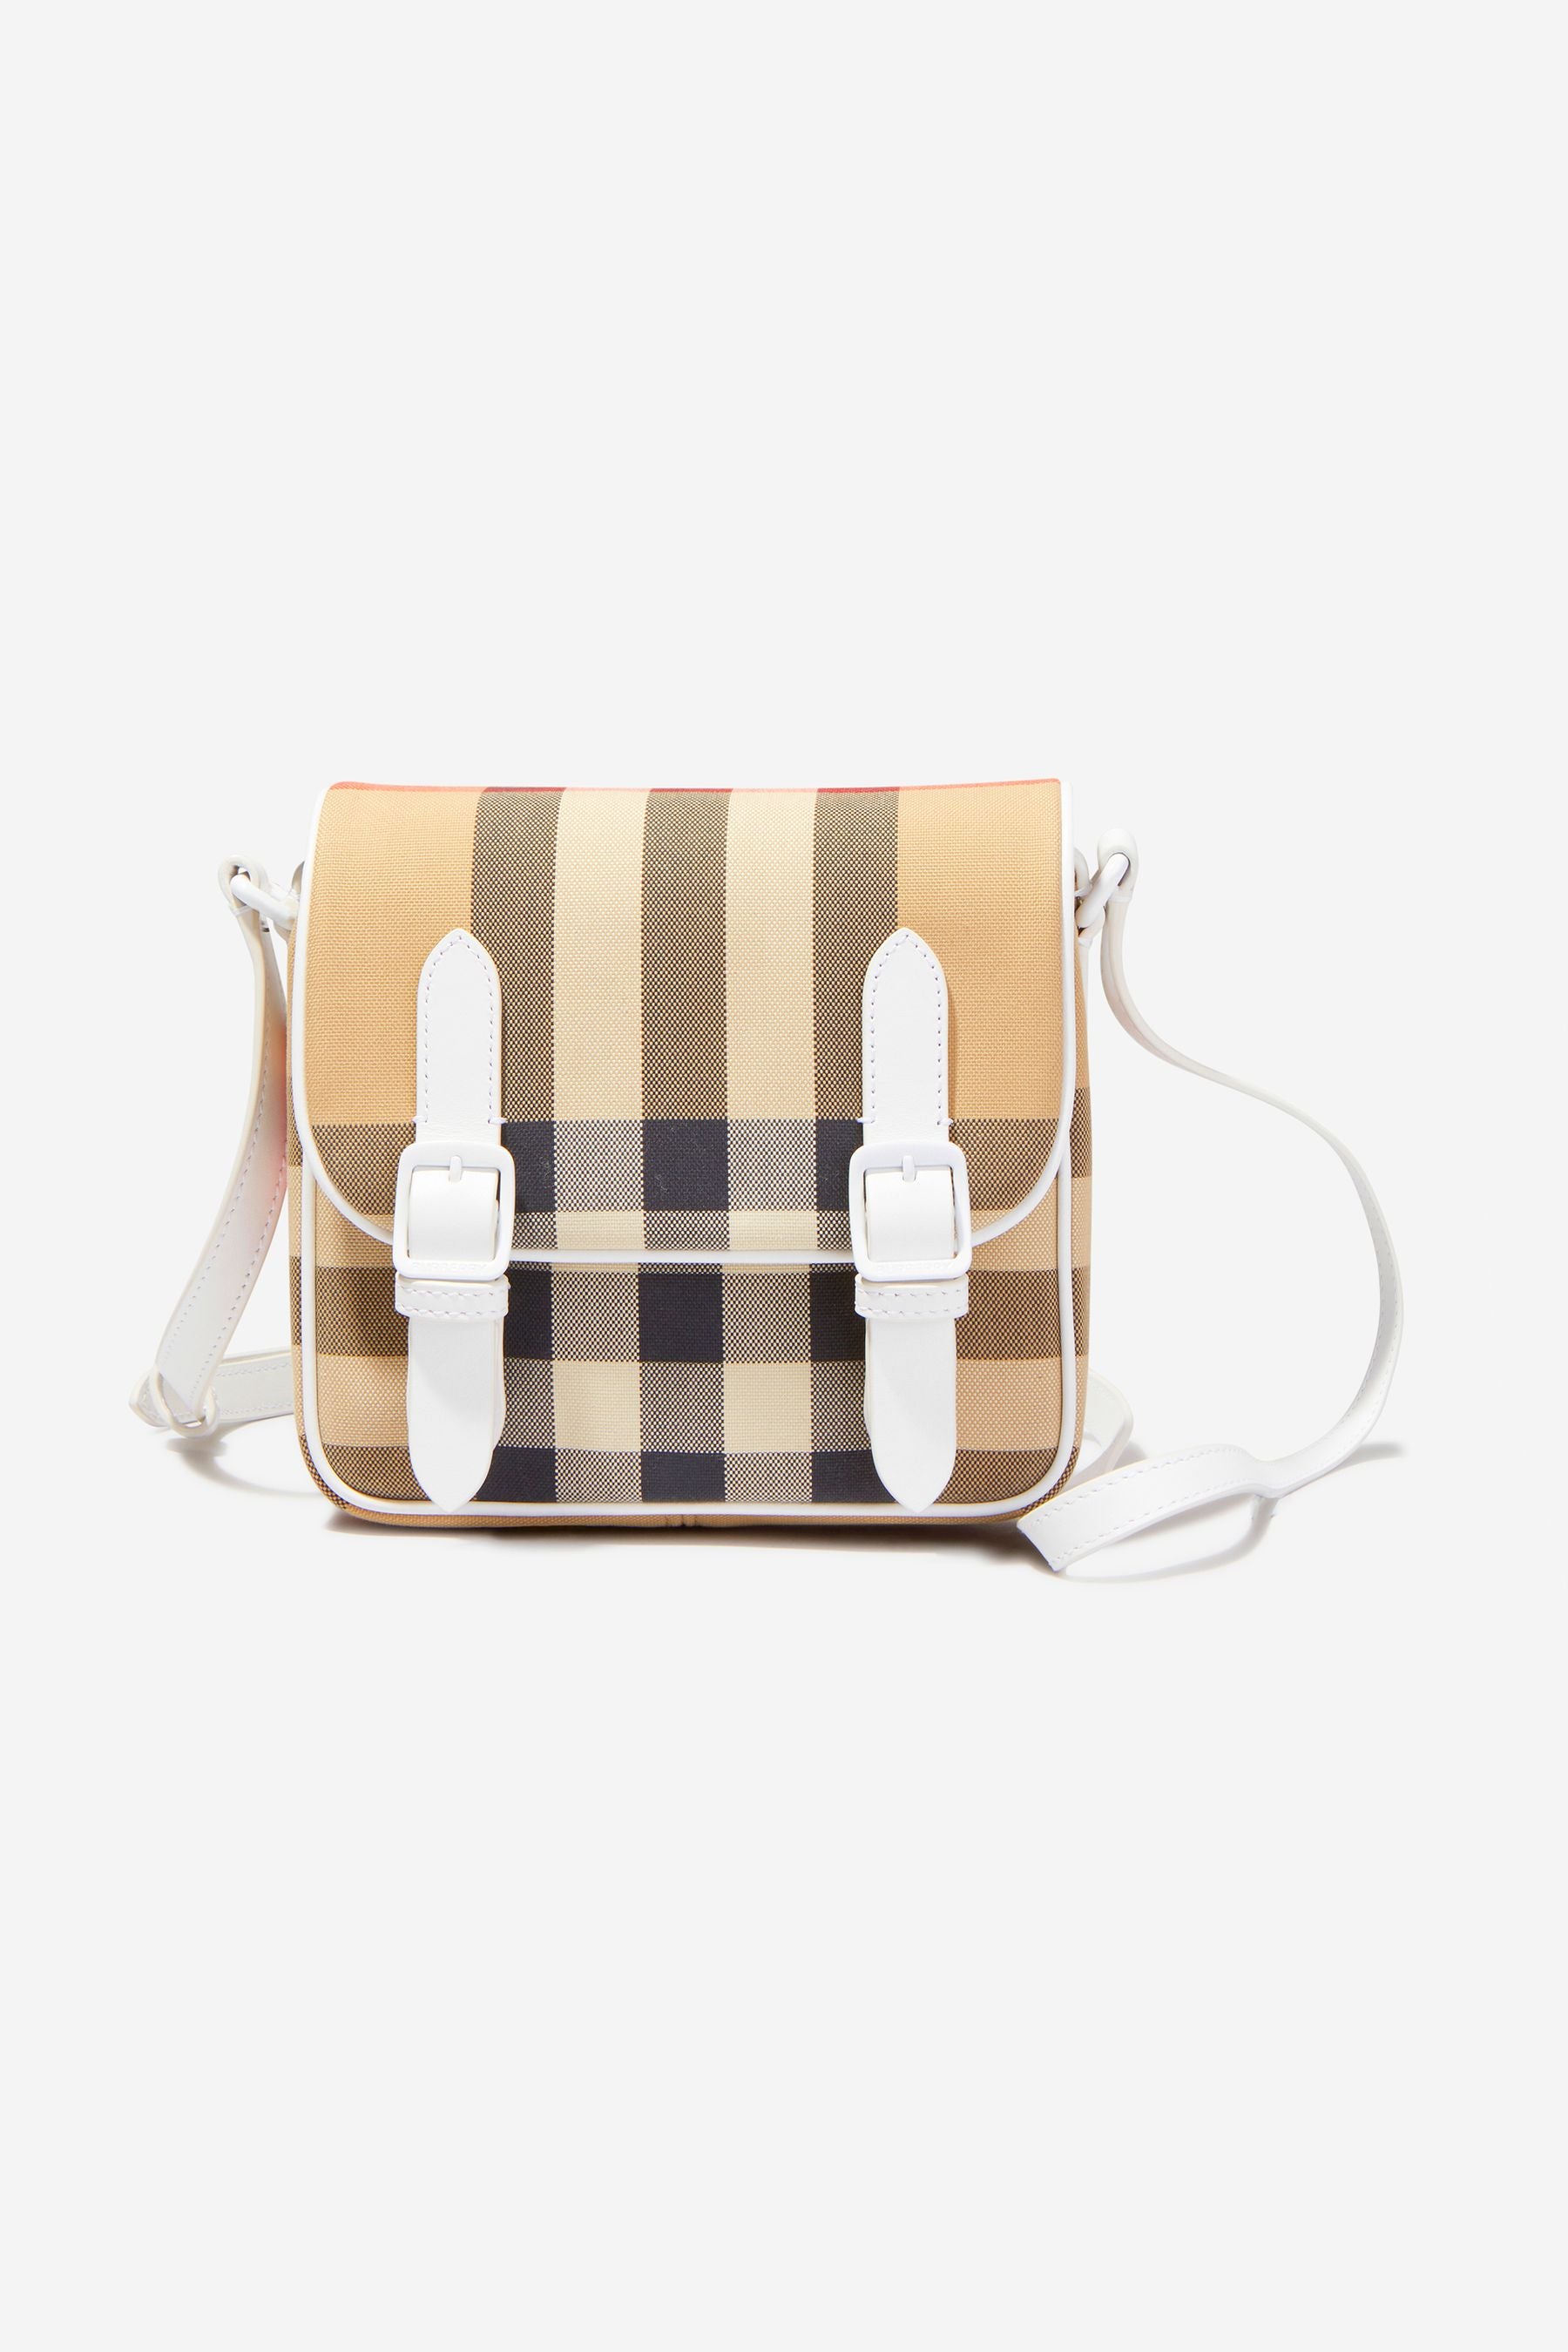 DKNY Diaper bags outlet - 1800 products on sale